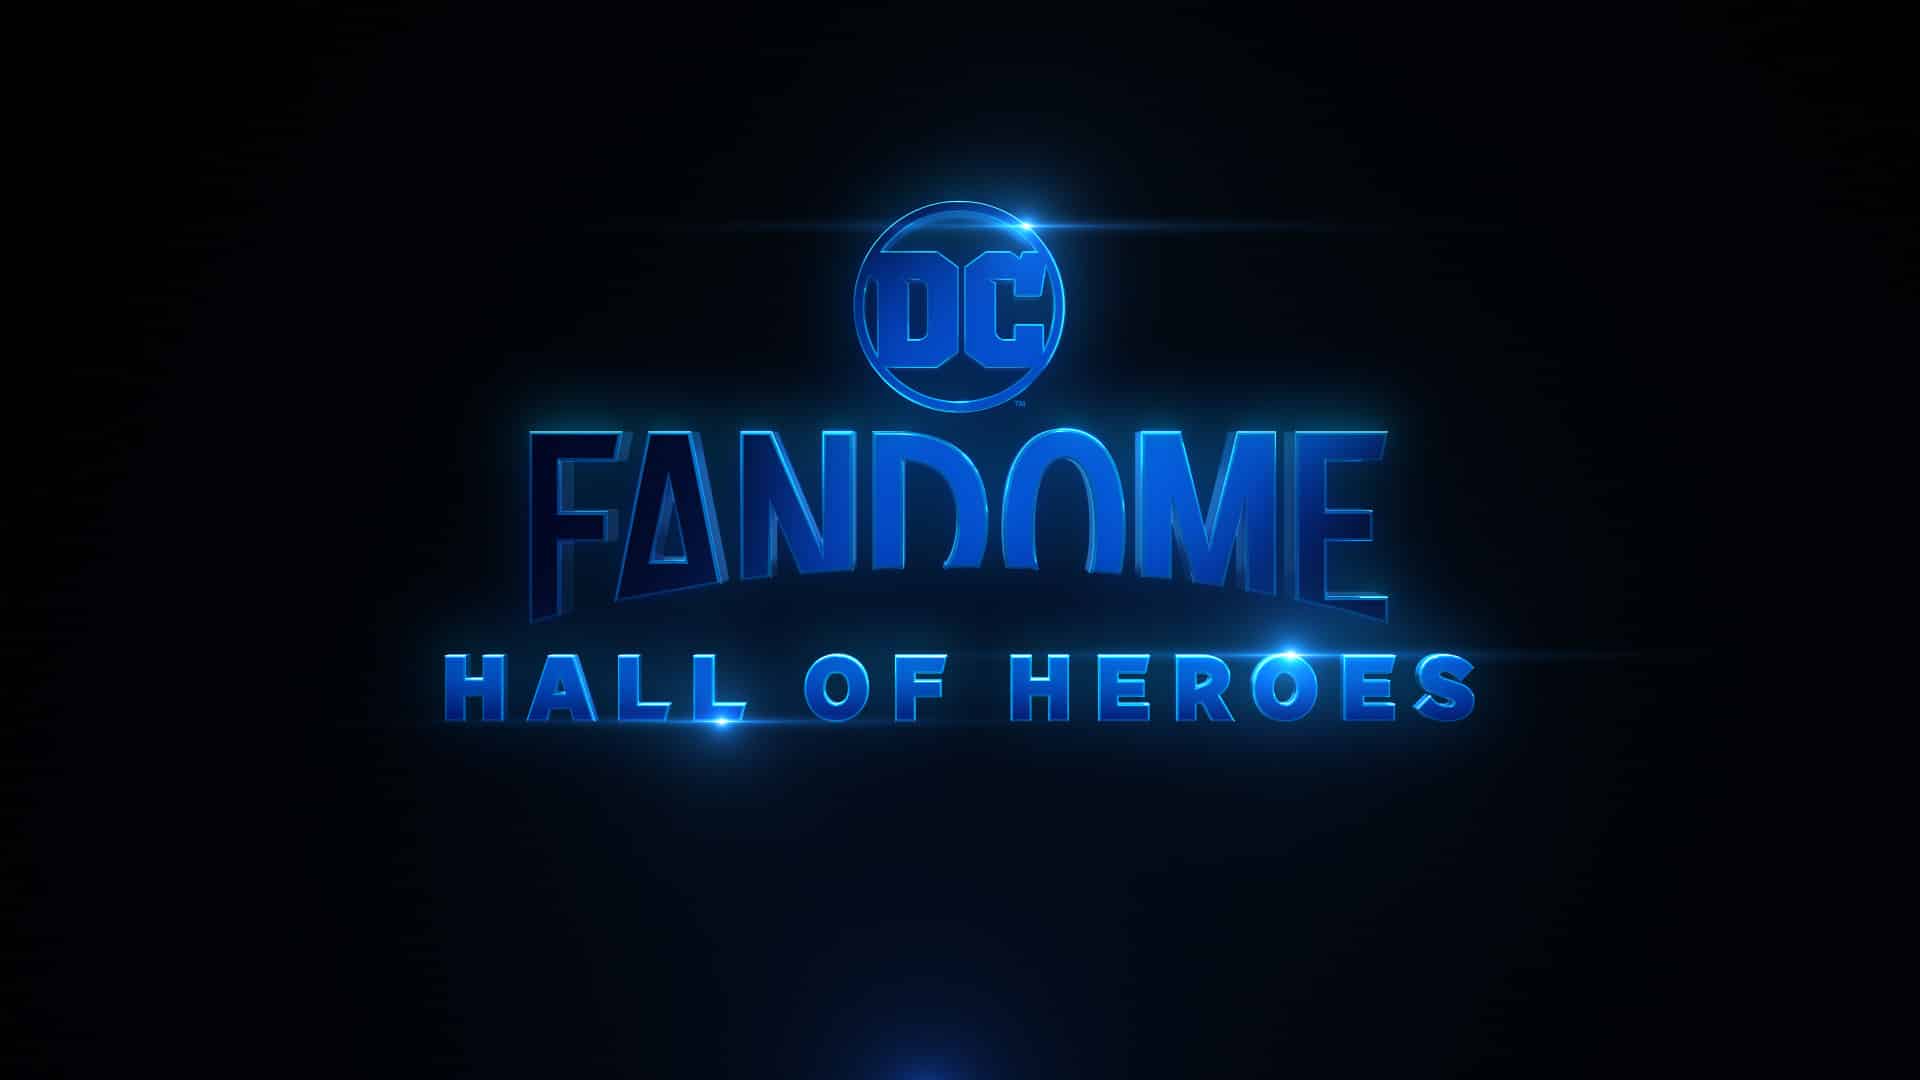 DC FanDome Hall of Heroes Official Trailer